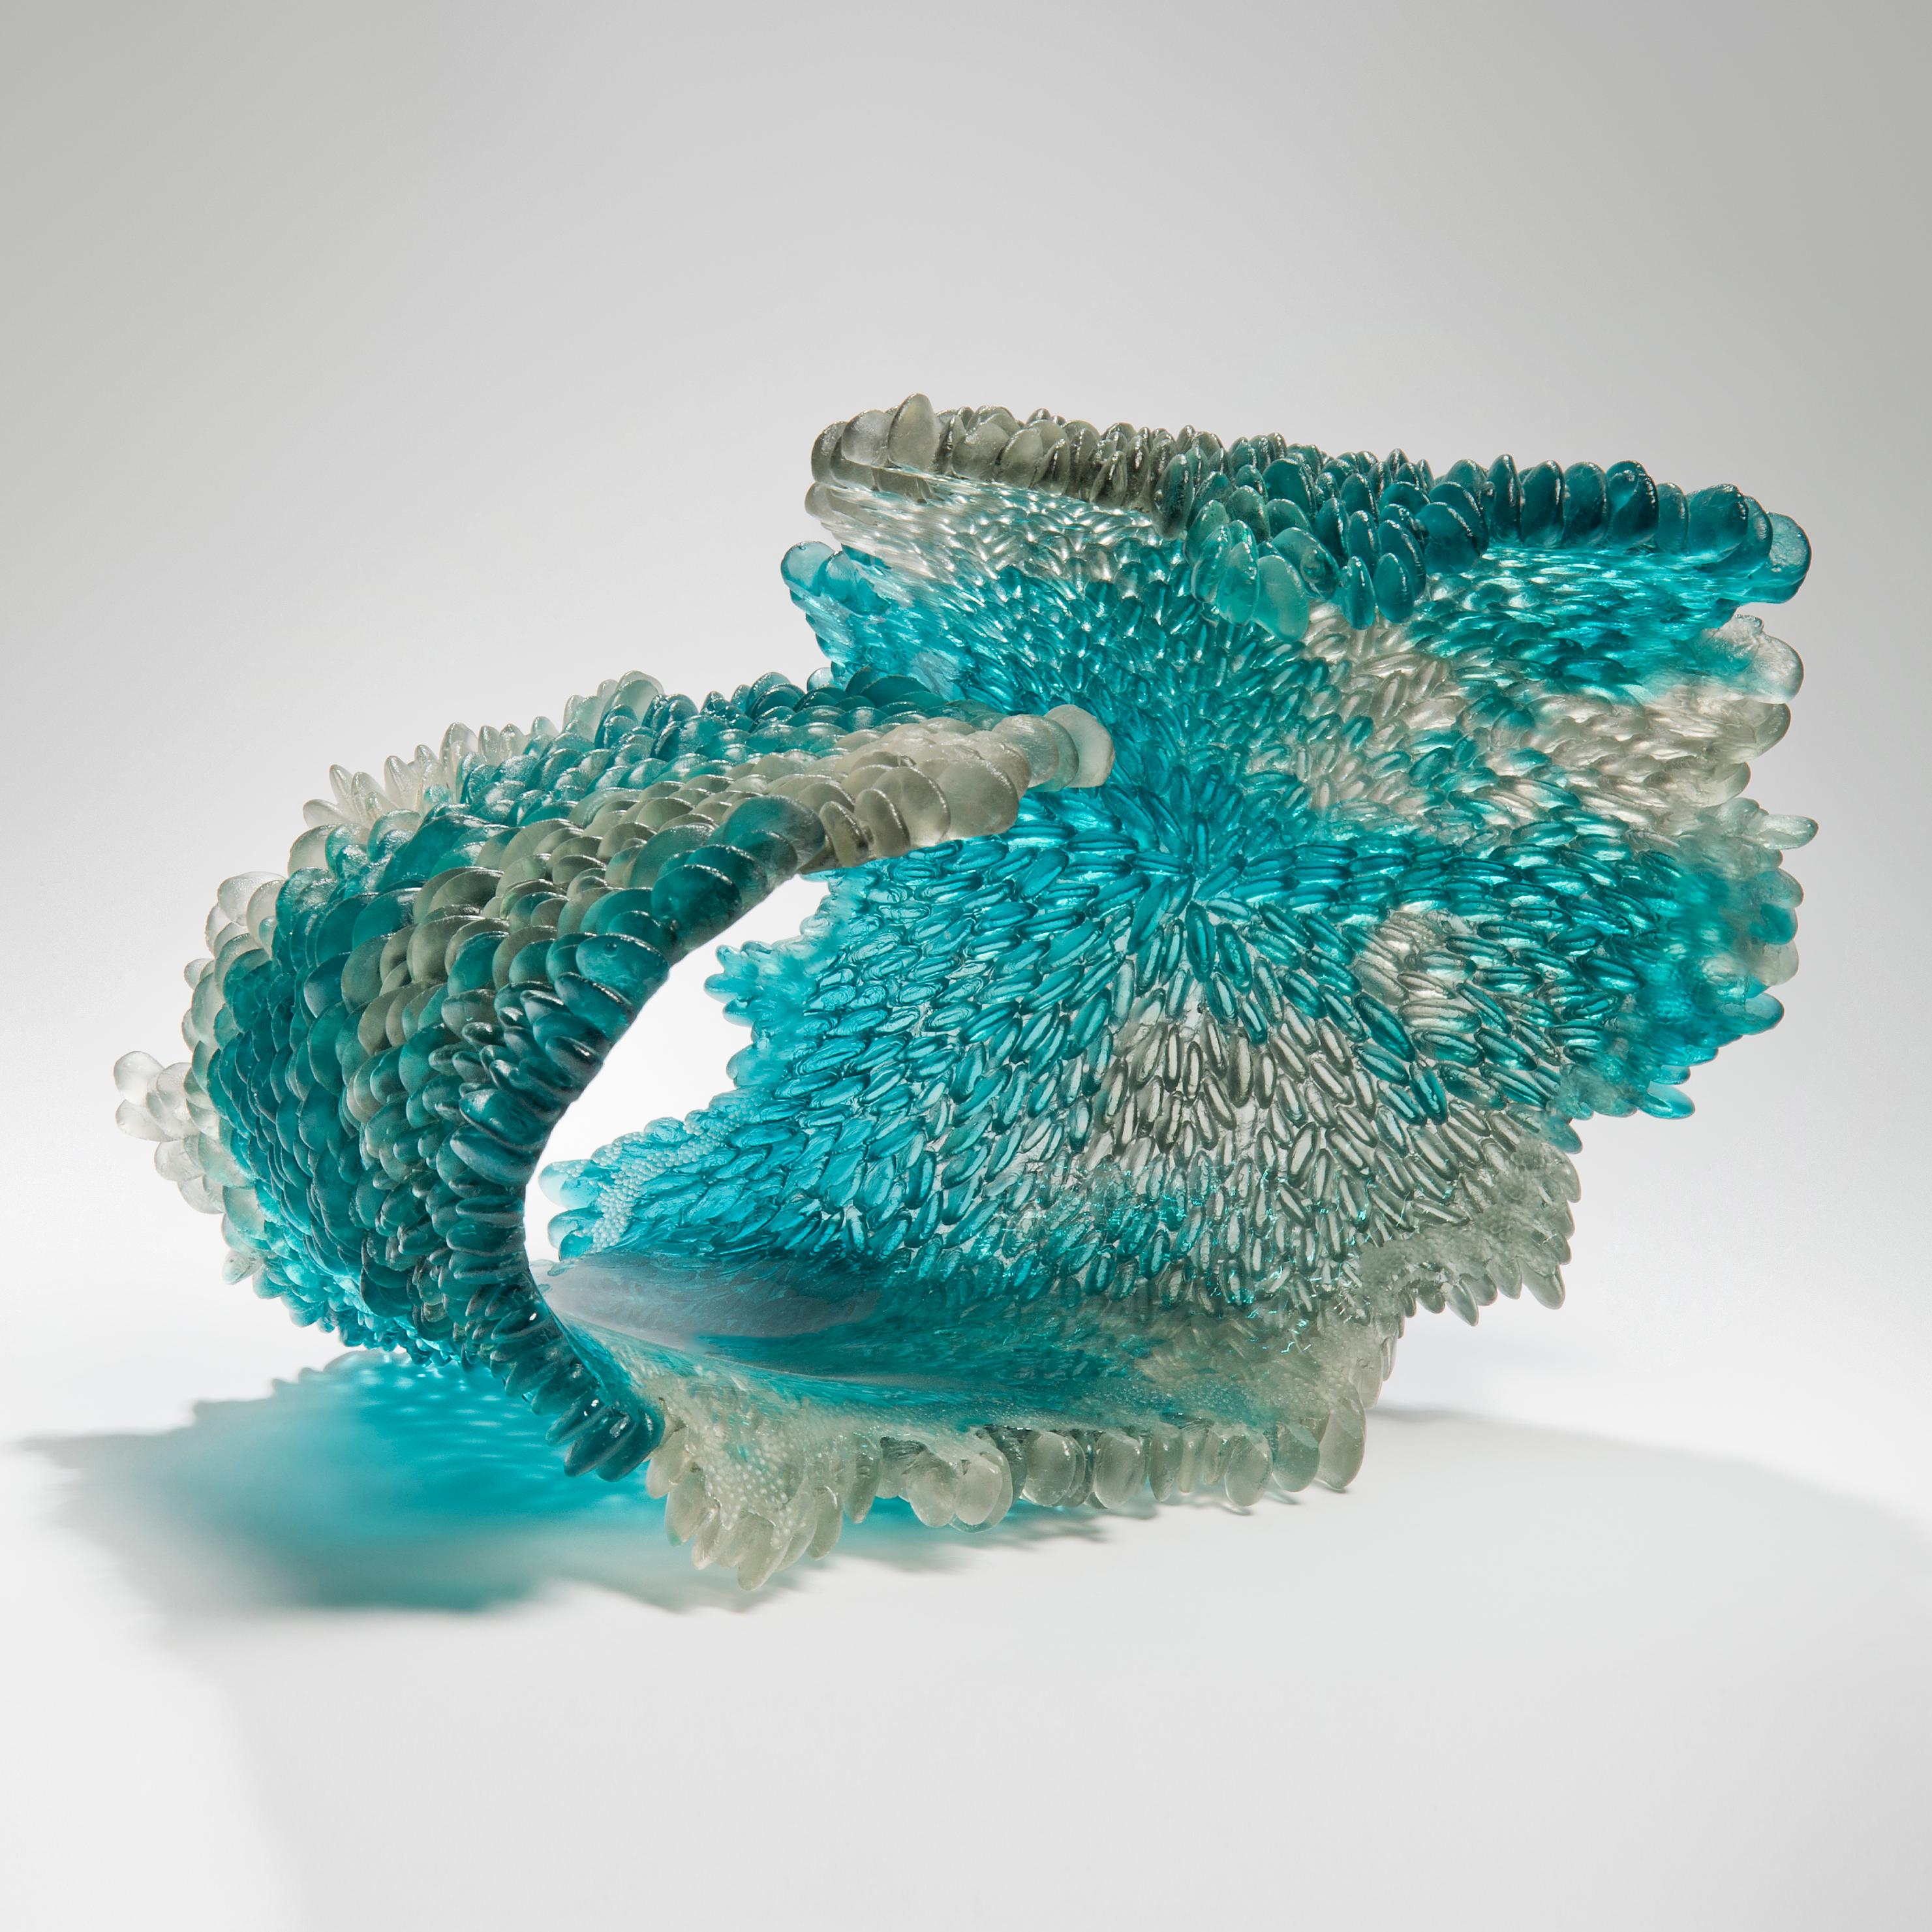 Alliform II is a unique textured glass sculpture in clear and teal by the British artist Nina Casson McGarva. 

Casson McGarva firstly casts her glass in a flat mould where she introduces all of the beautifully detailed, scaled surface texture,